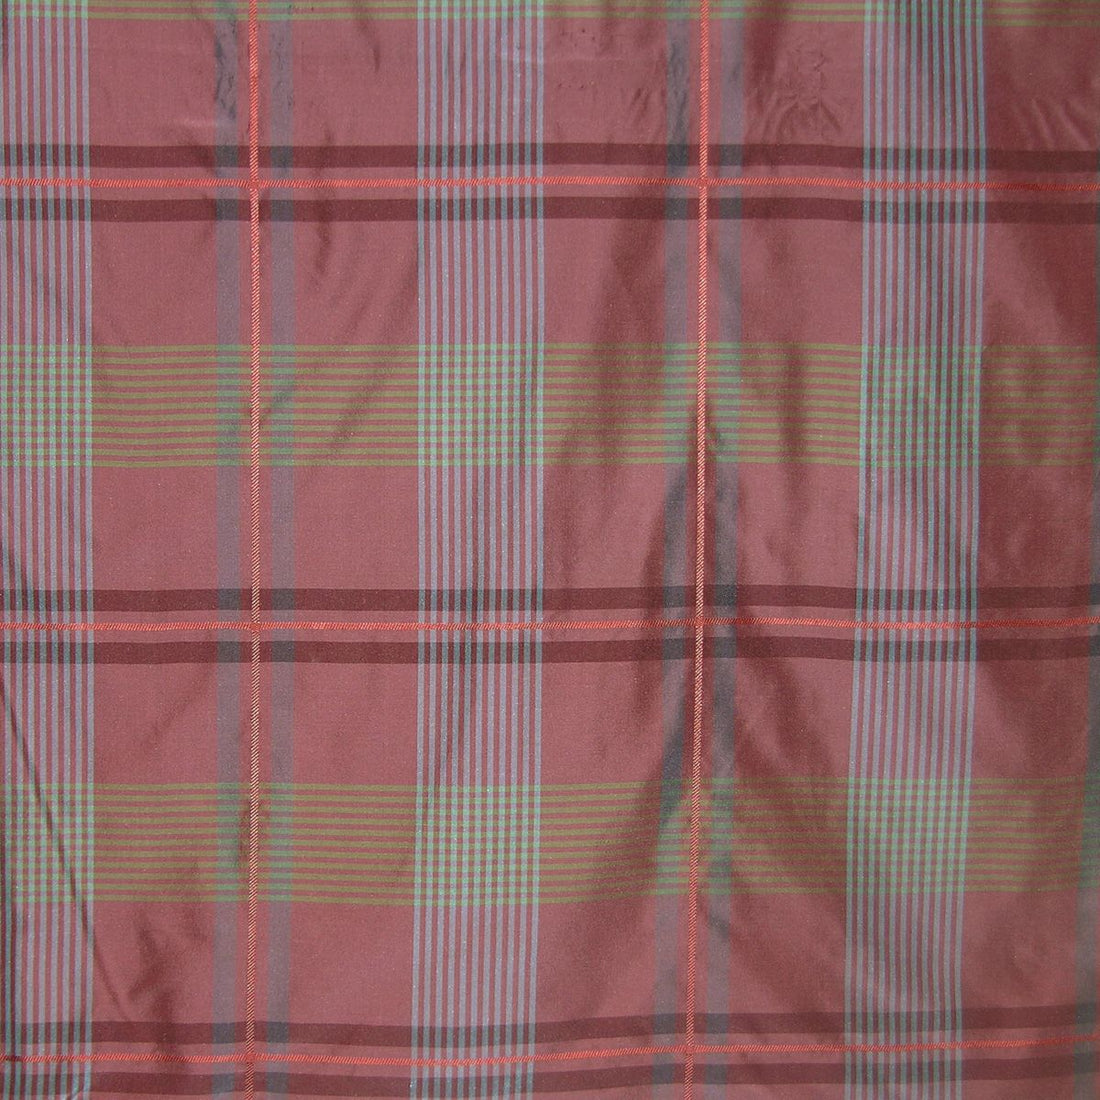 Fasianella fabric in wine color - pattern number SB 00011786 - by Scalamandre in the Old World Weavers collection